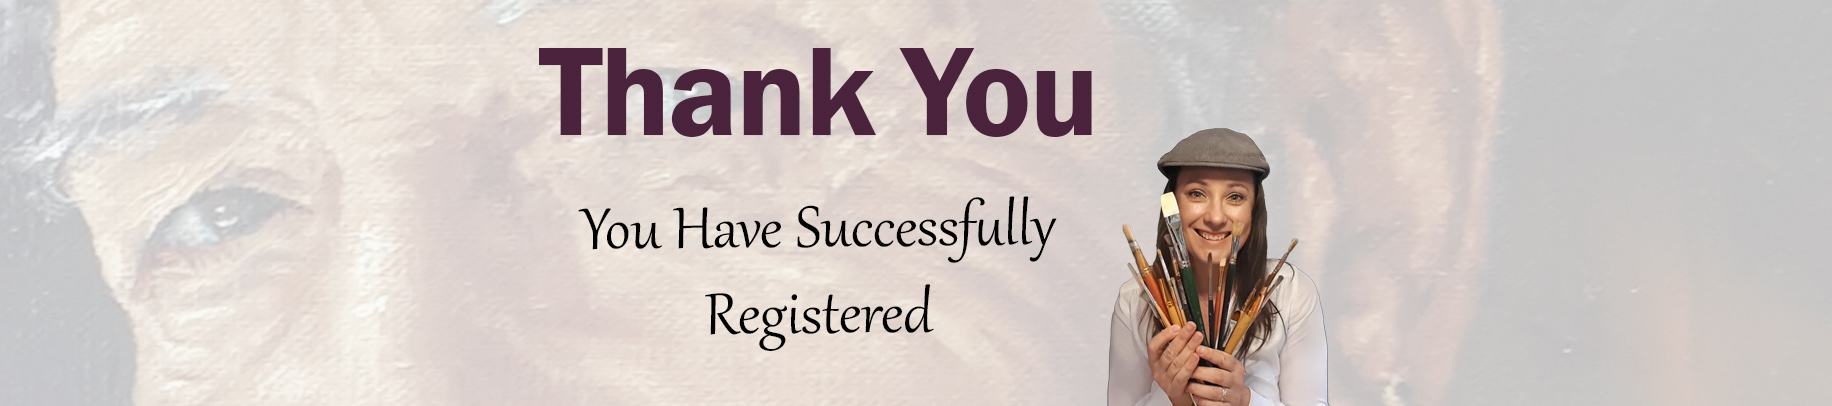 Thank You for registration